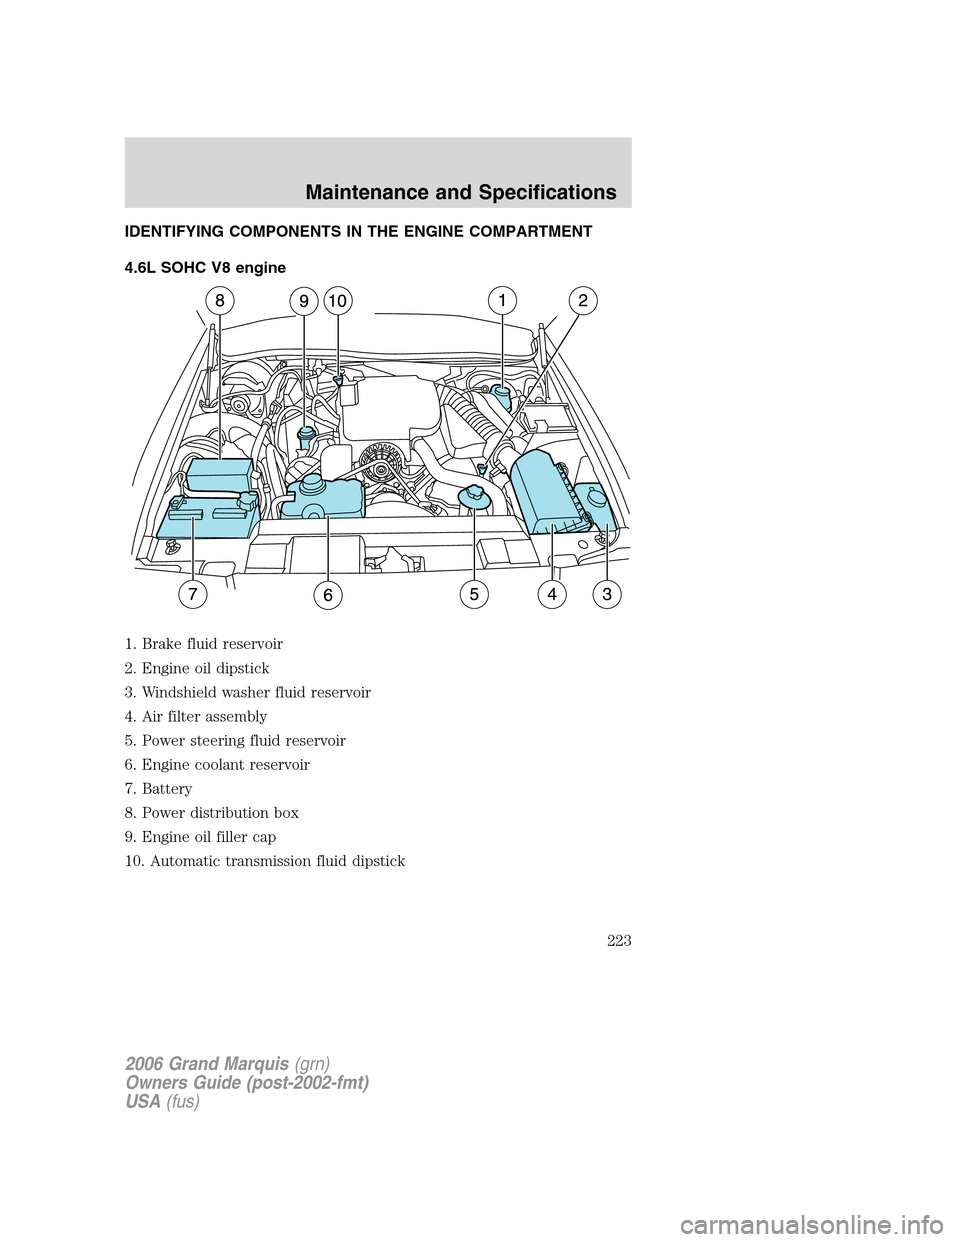 Mercury Grand Marquis 2006  Owners Manuals IDENTIFYING COMPONENTS IN THE ENGINE COMPARTMENT
4.6L SOHC V8 engine
1. Brake fluid reservoir
2. Engine oil dipstick
3. Windshield washer fluid reservoir
4. Air filter assembly
5. Power steering fluid